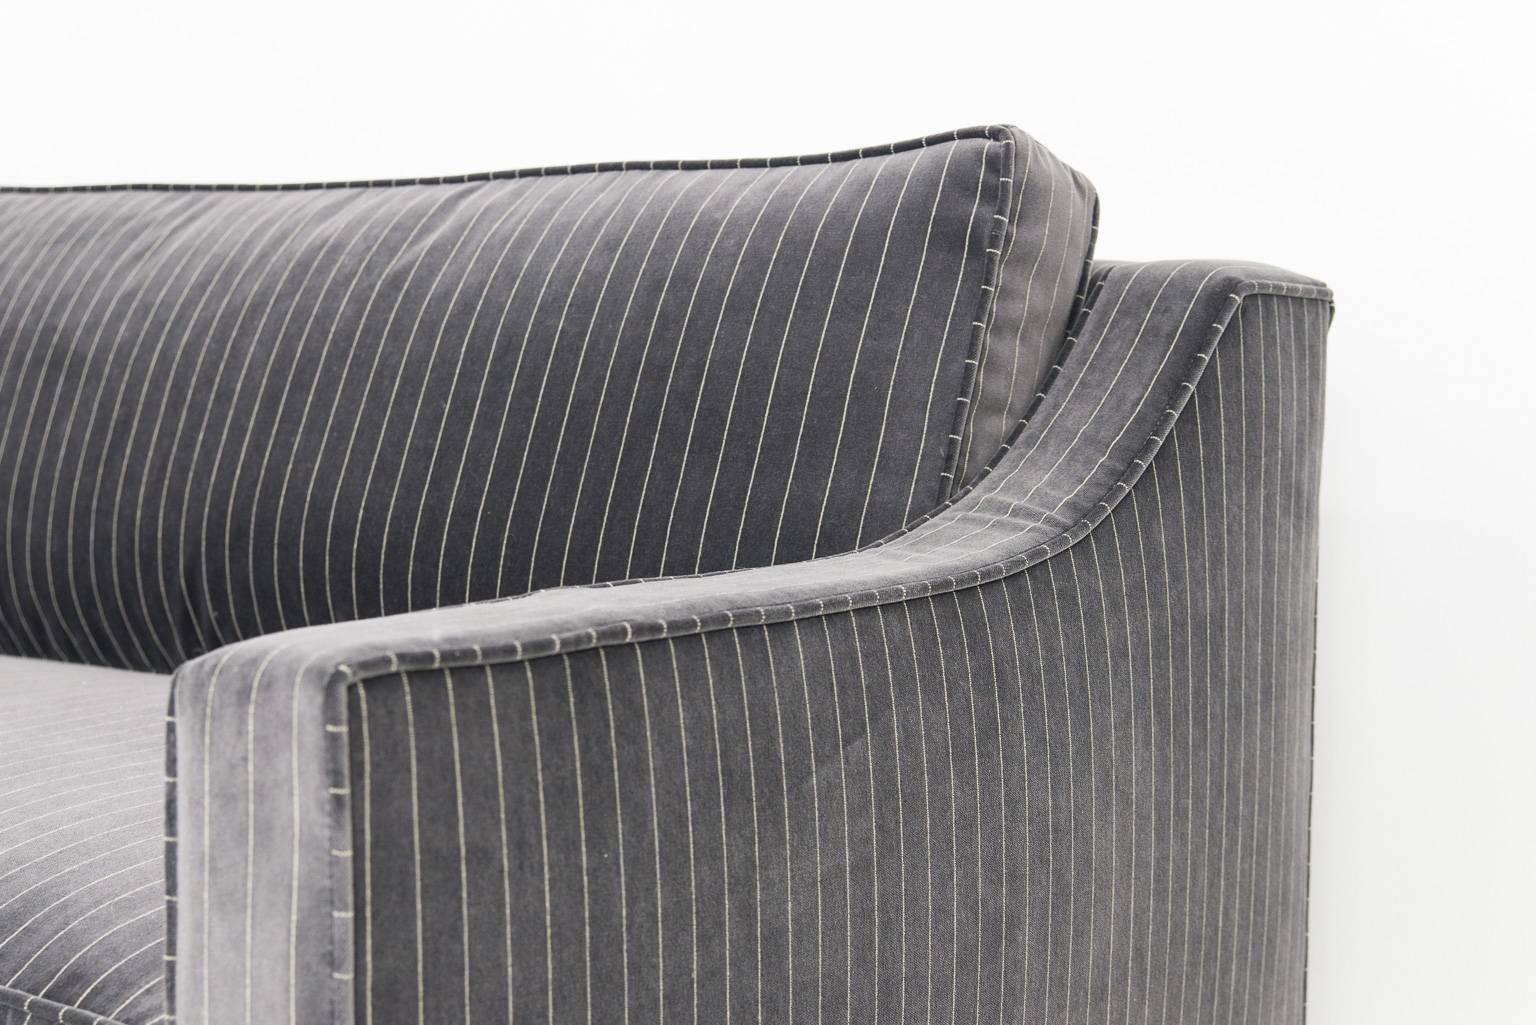 The Audrey sofa upholstered in a refined pinstriped charcoal with chrome L-legs.

Measures: 9' long/38